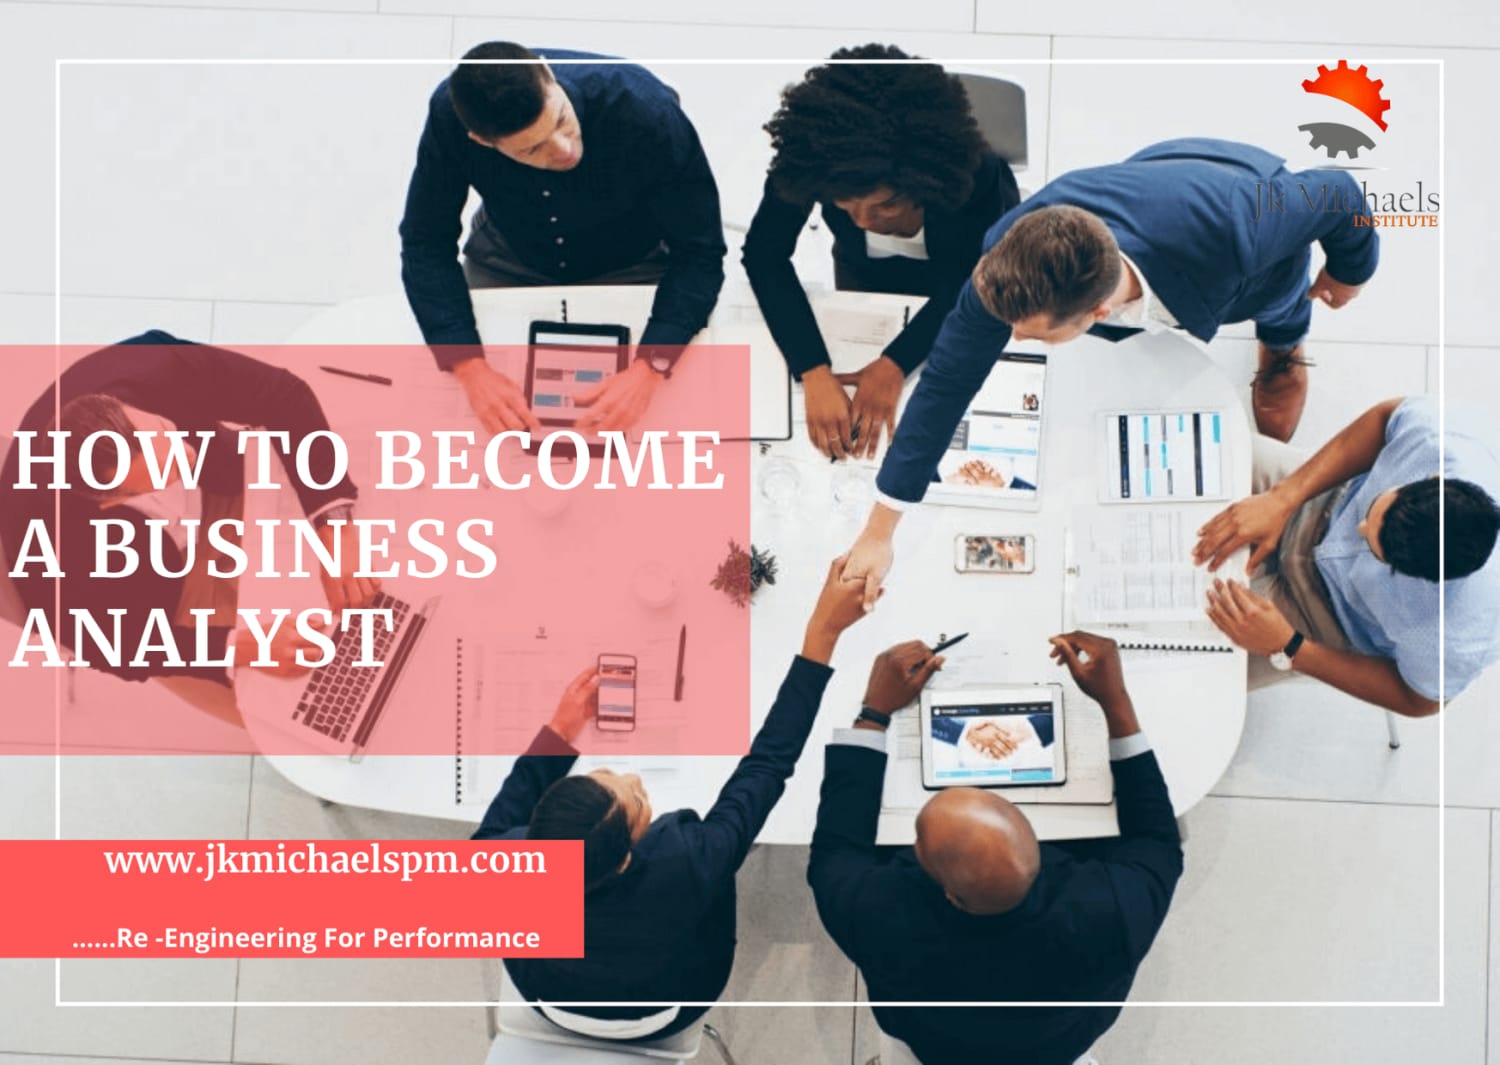 HOW TO BECOME A BUSINESS ANALYST